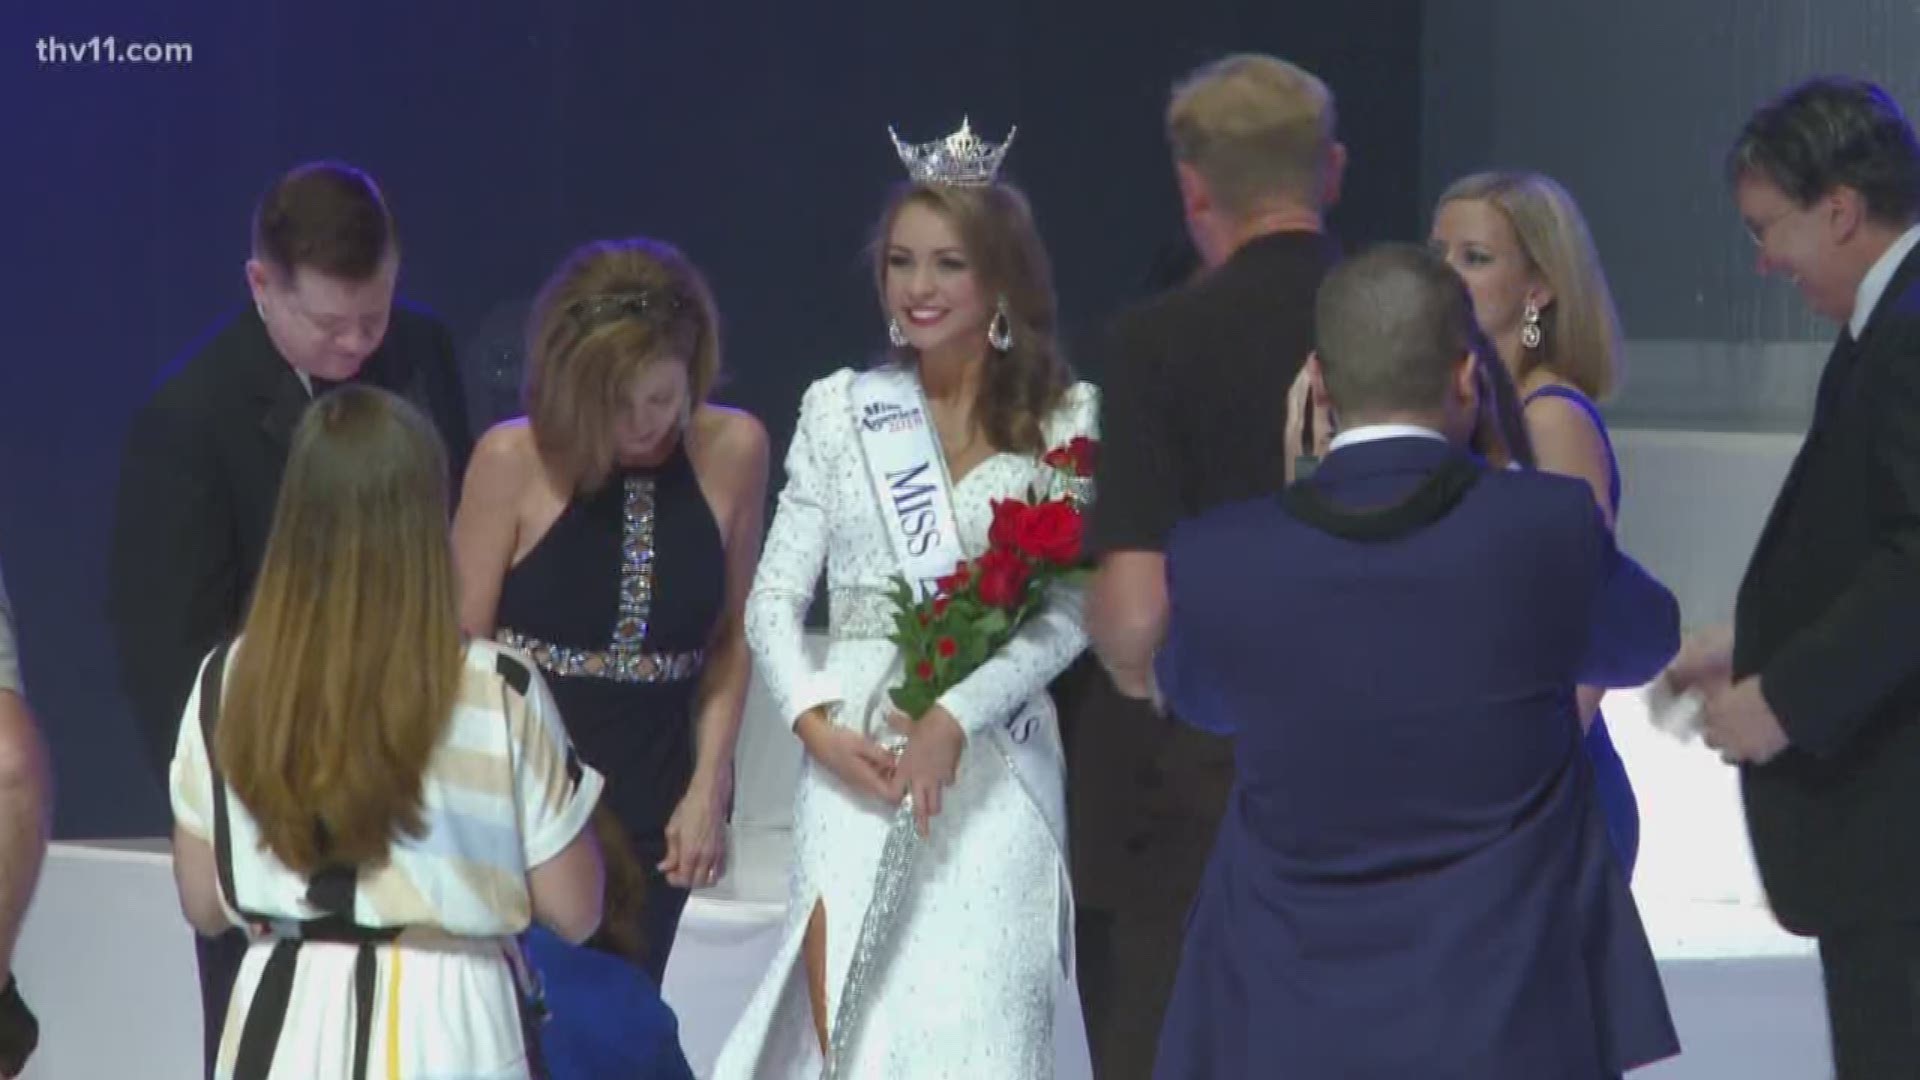 Claudia Raffo prepares to compete in Miss America as the newly minted Miss Arkansas.